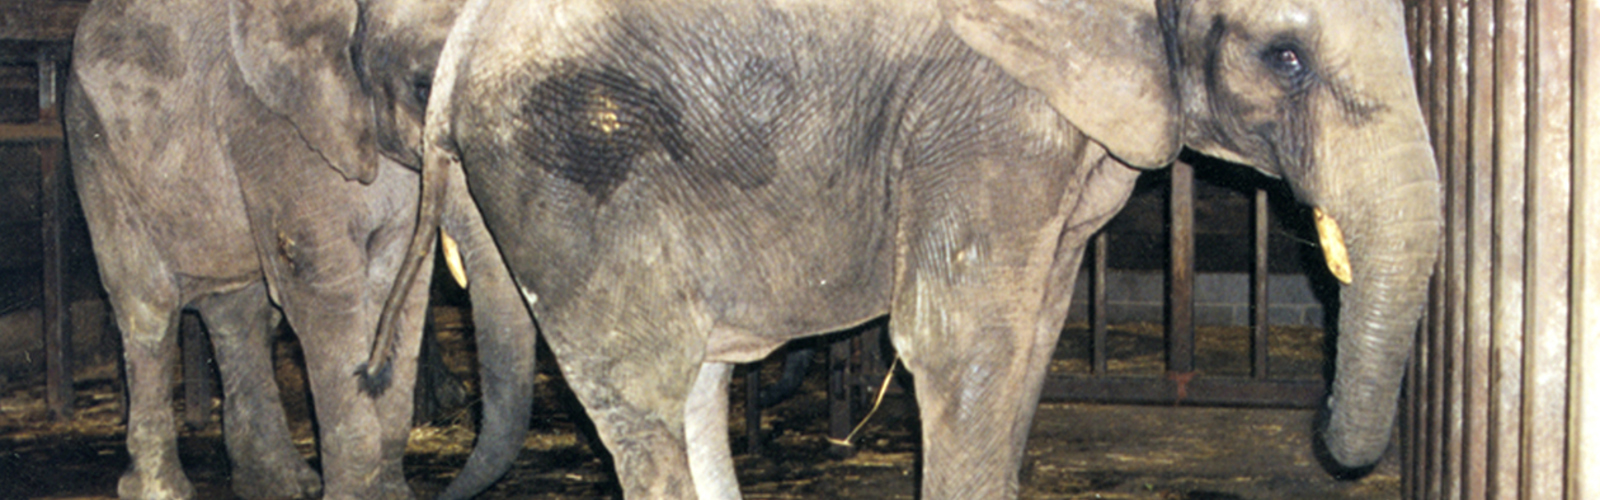 Wild animals banned from circuses